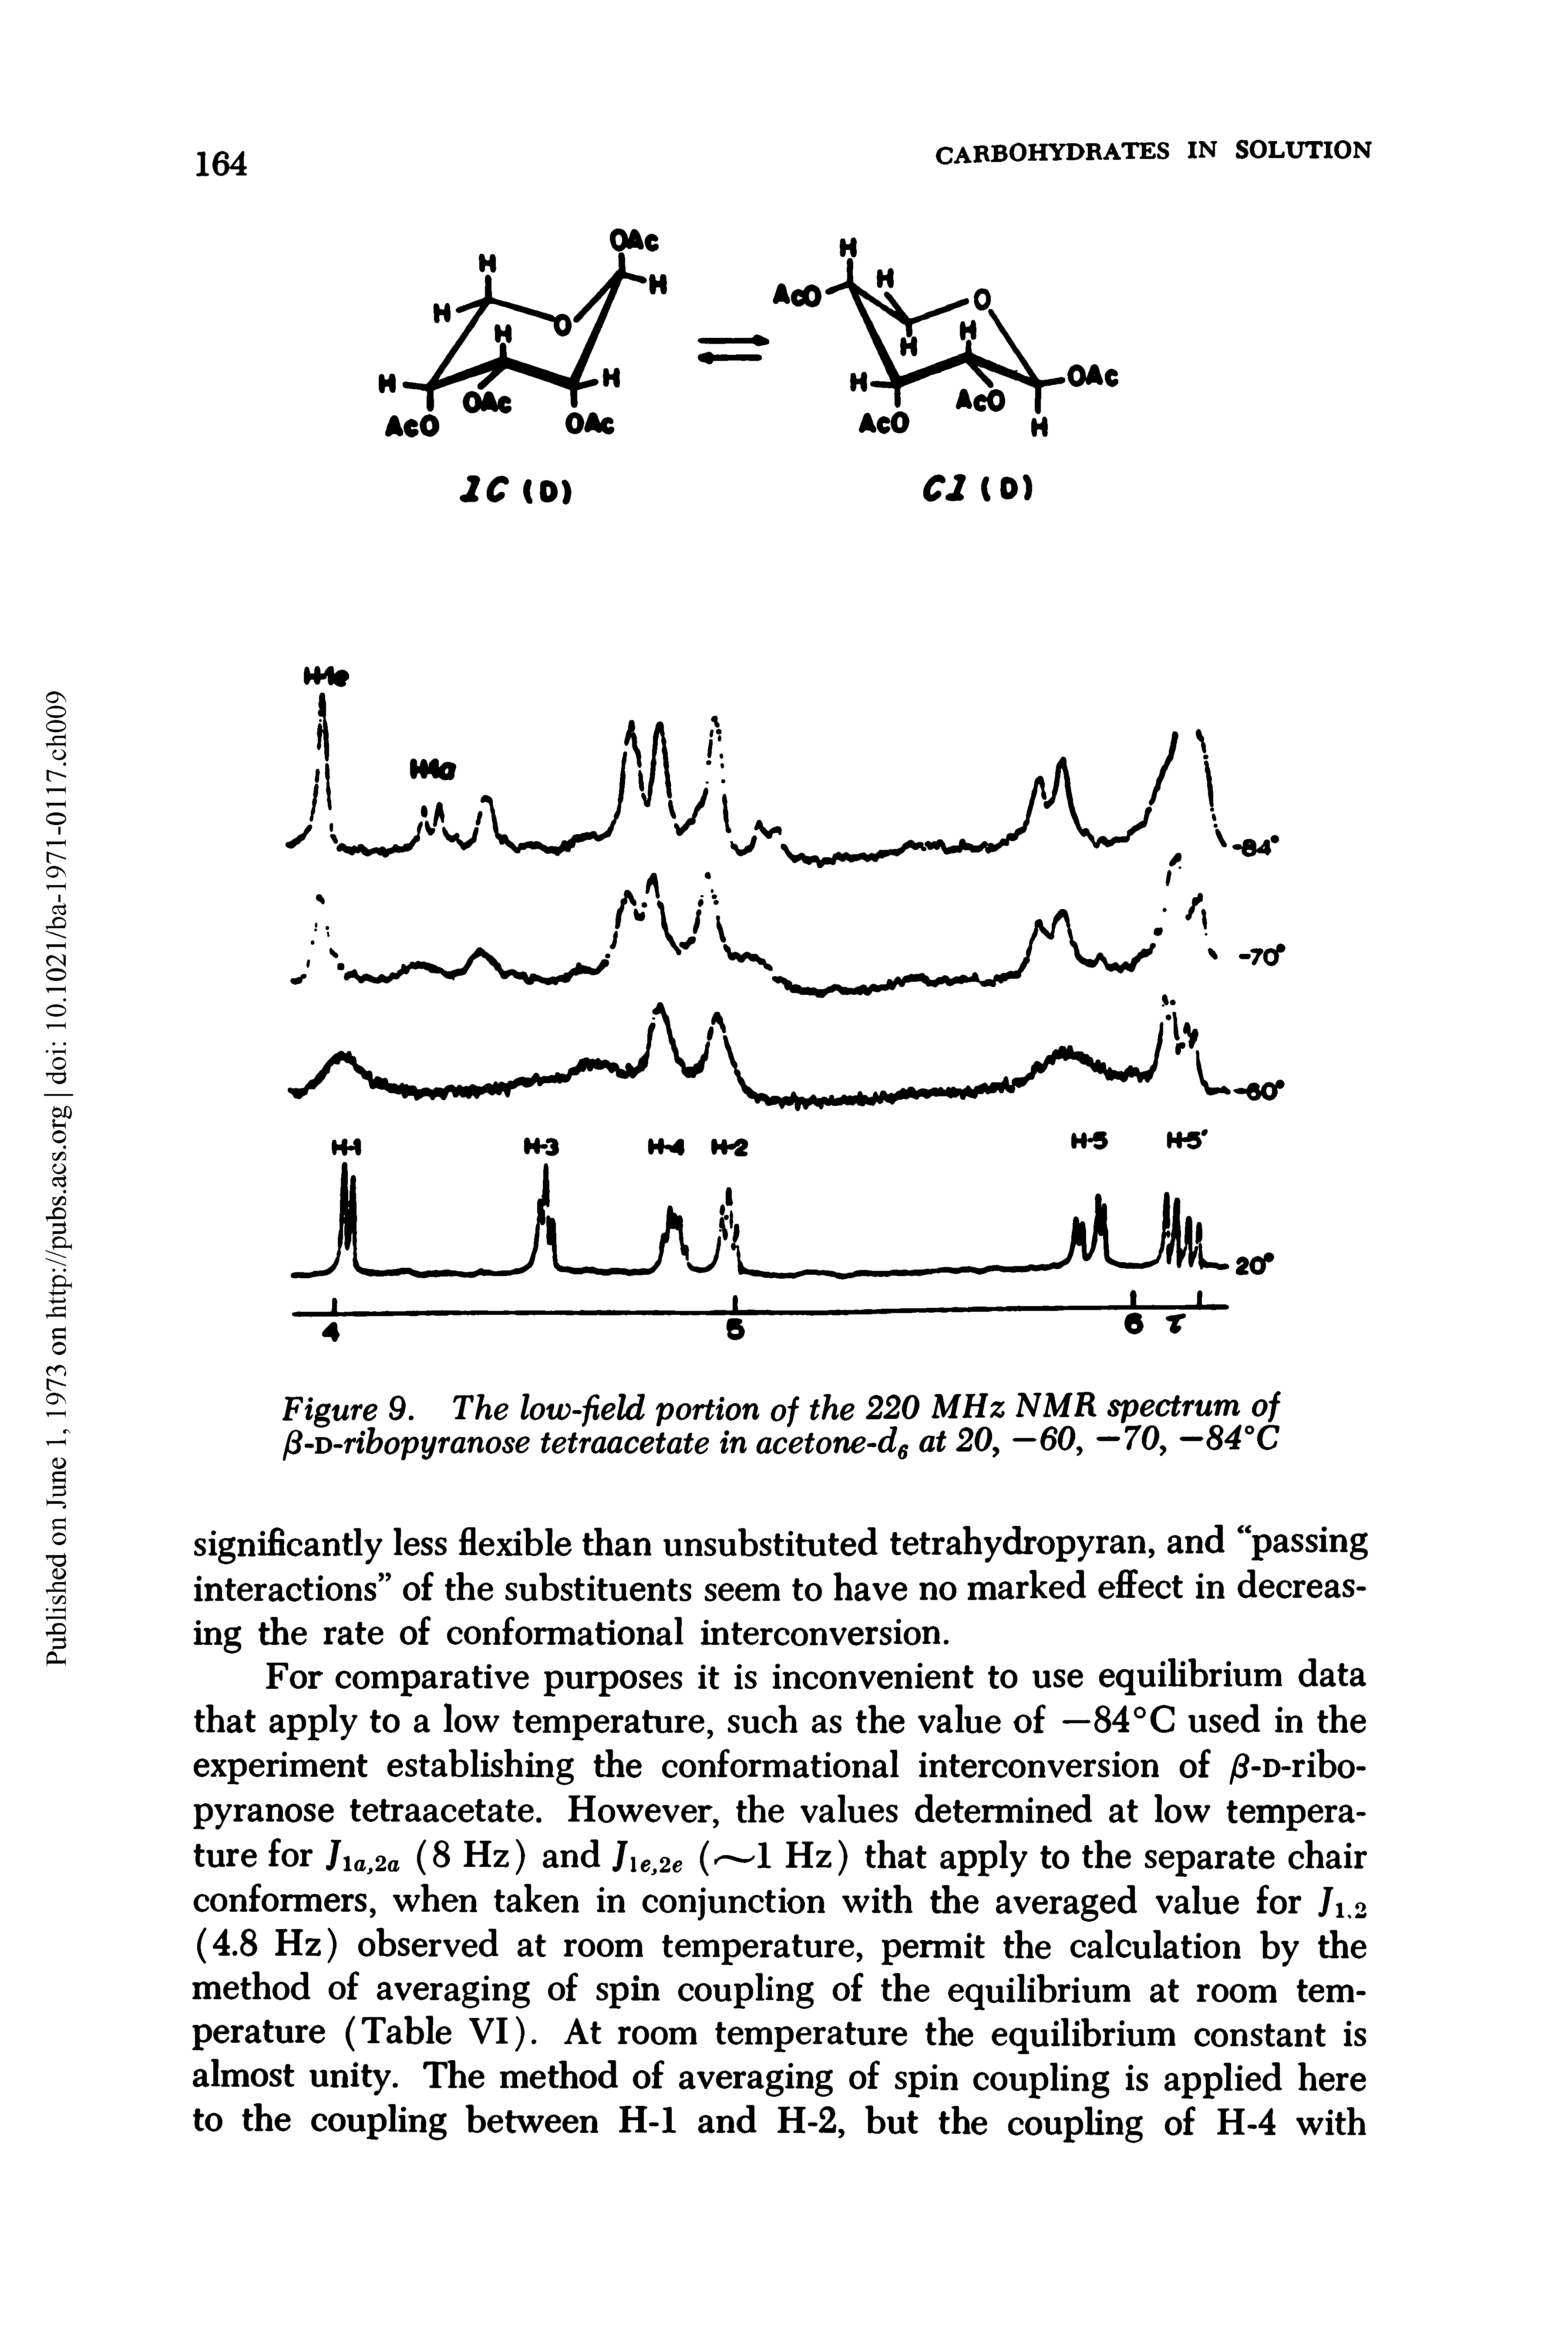 Figure 9. The low-field portion of the 220 MHz NMR spectrum of fi-D-ribopyranose tetraacetate in acetone-d6 at 20, —60, —70, —84°C...